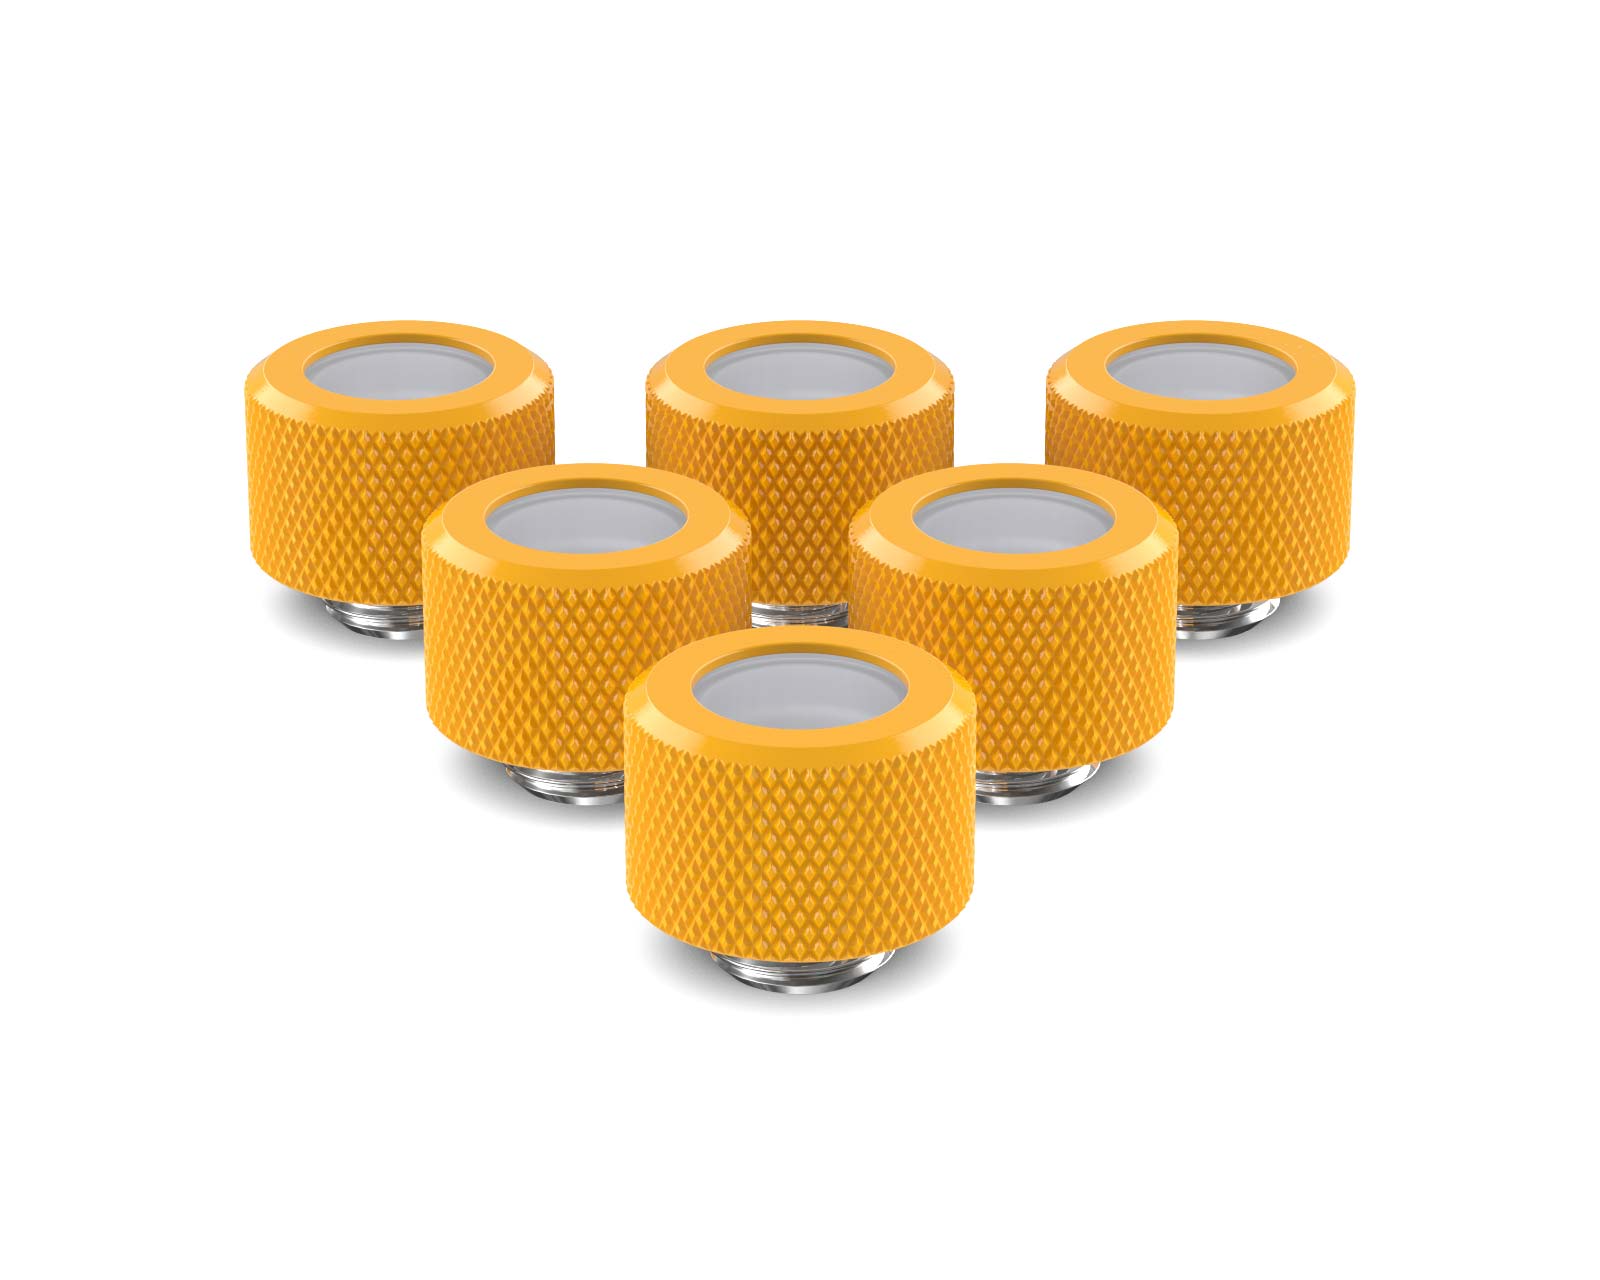 PrimoChill 14mm OD Rigid SX Fitting - 6 Pack - PrimoChill - KEEPING IT COOL Yellow